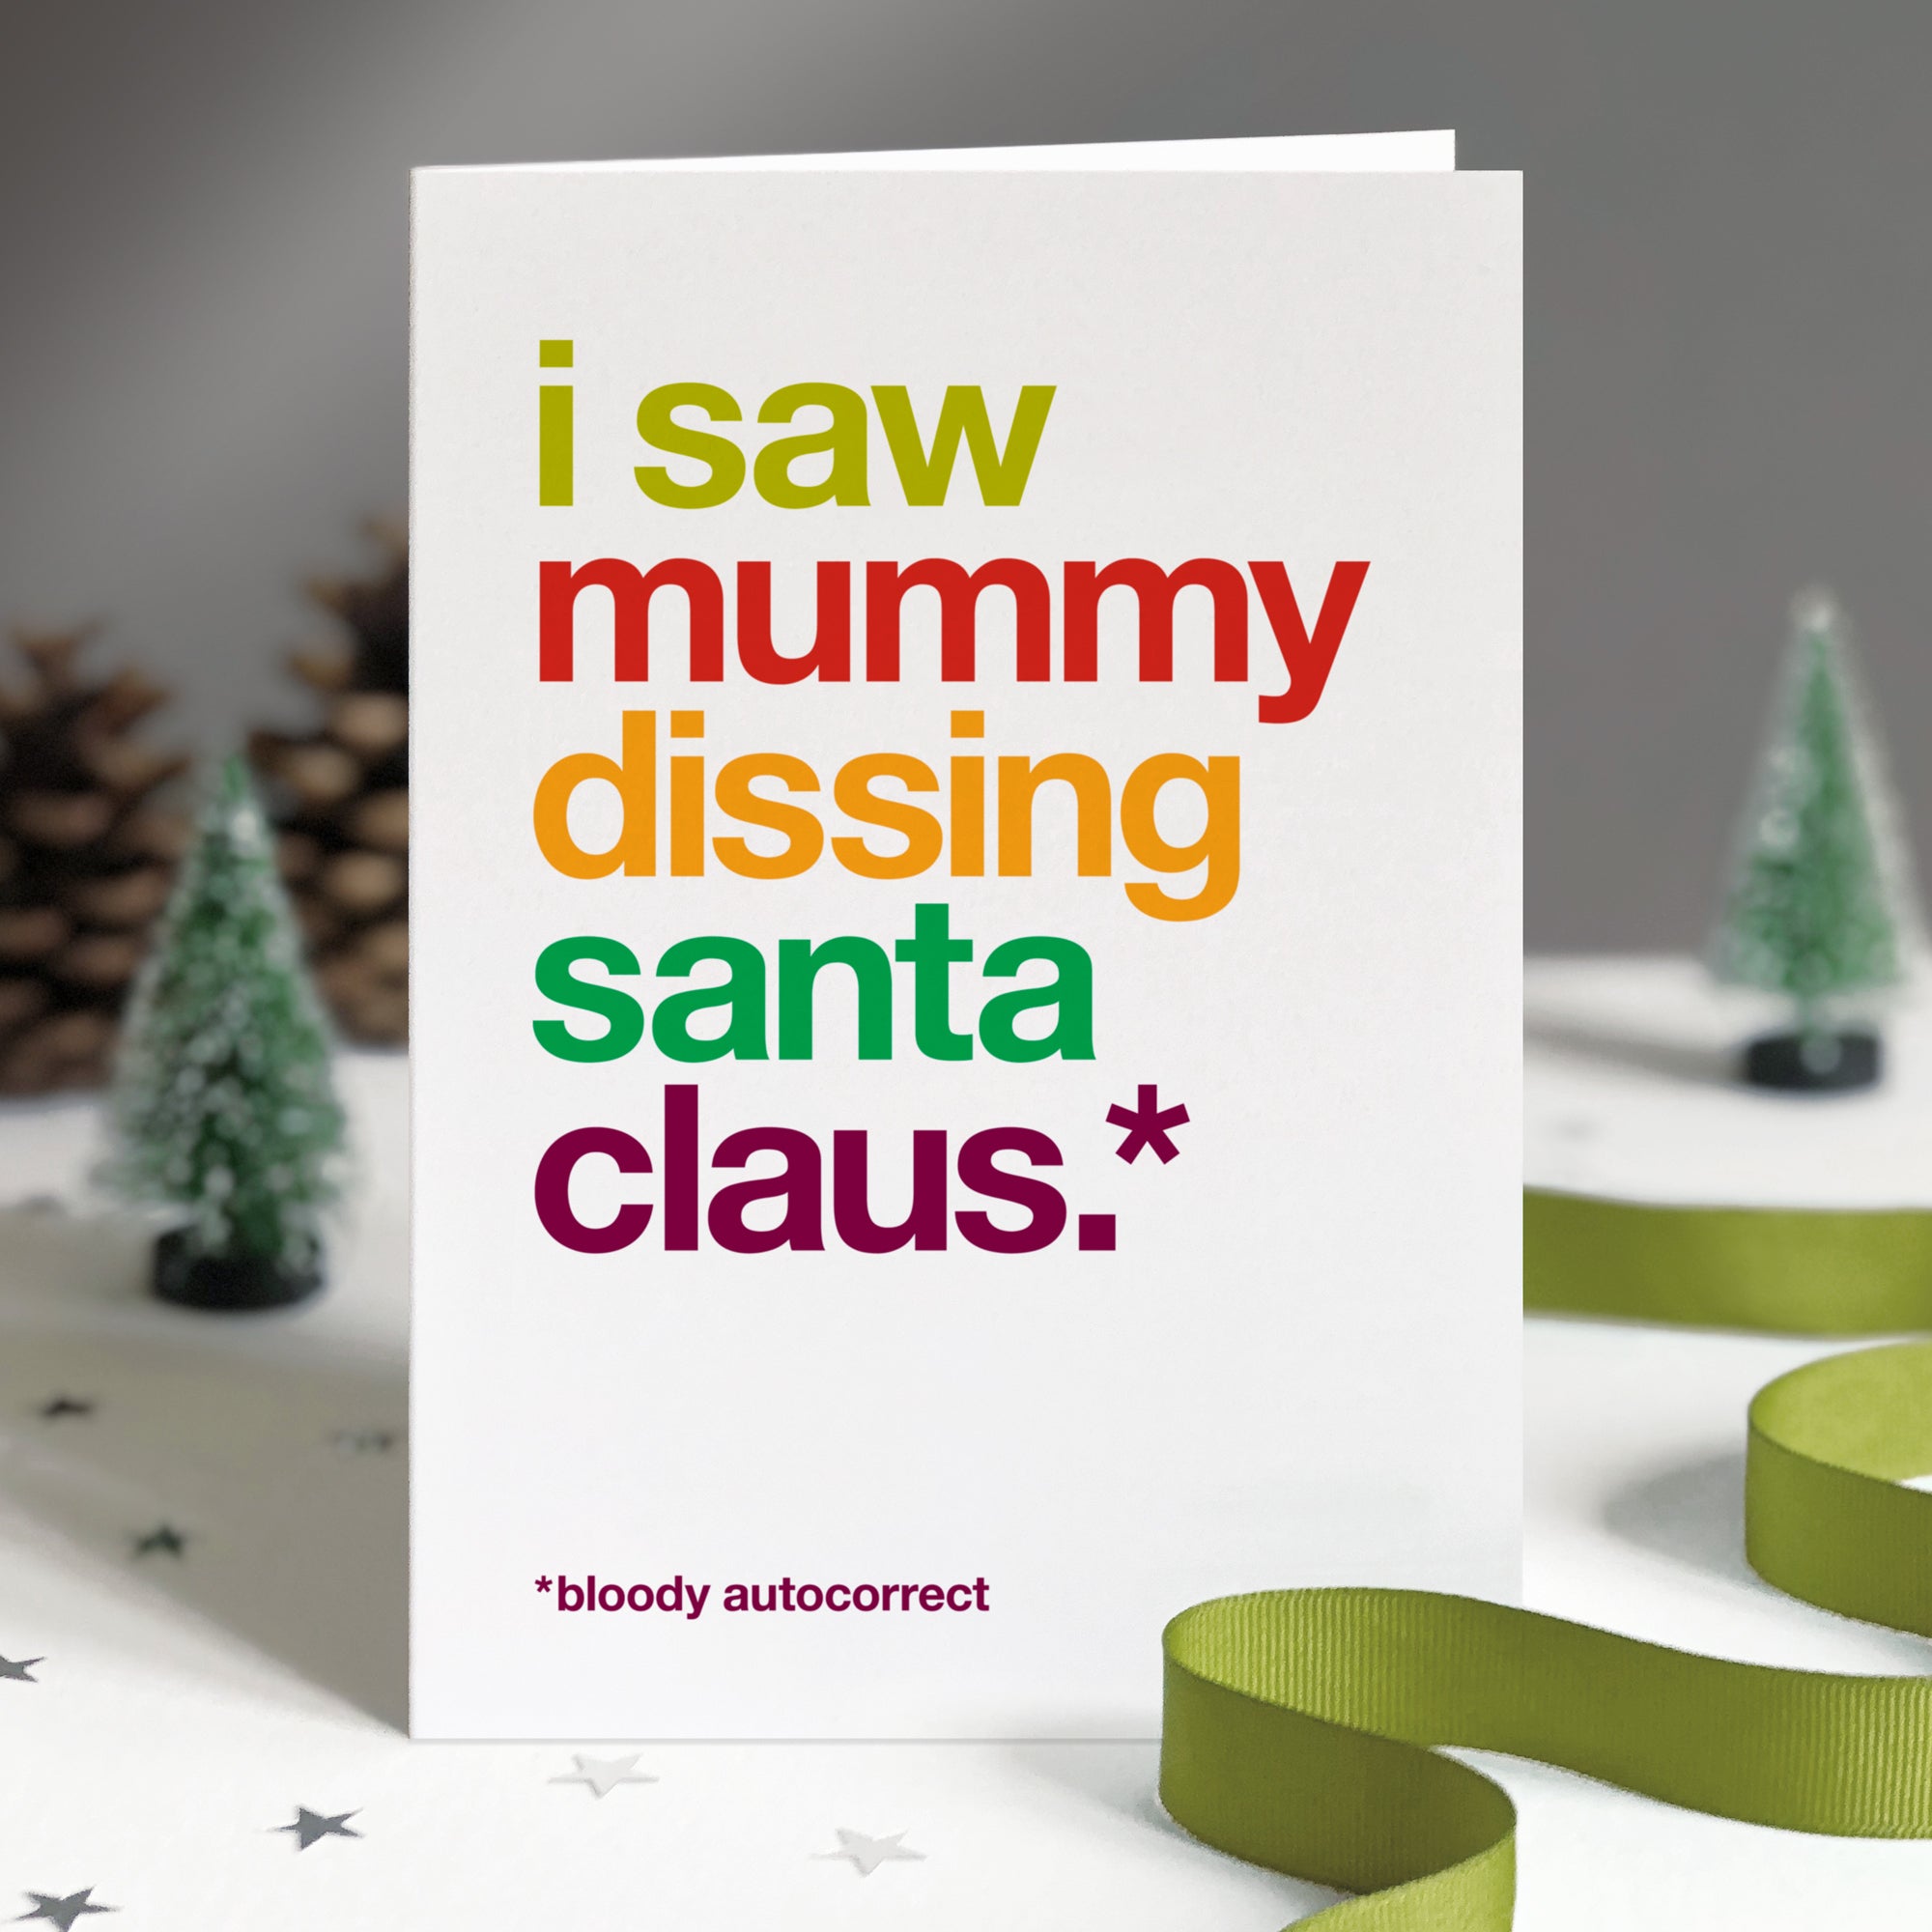 Funny christmas card autocorrected to 'i saw mummy dissing santa claus.'